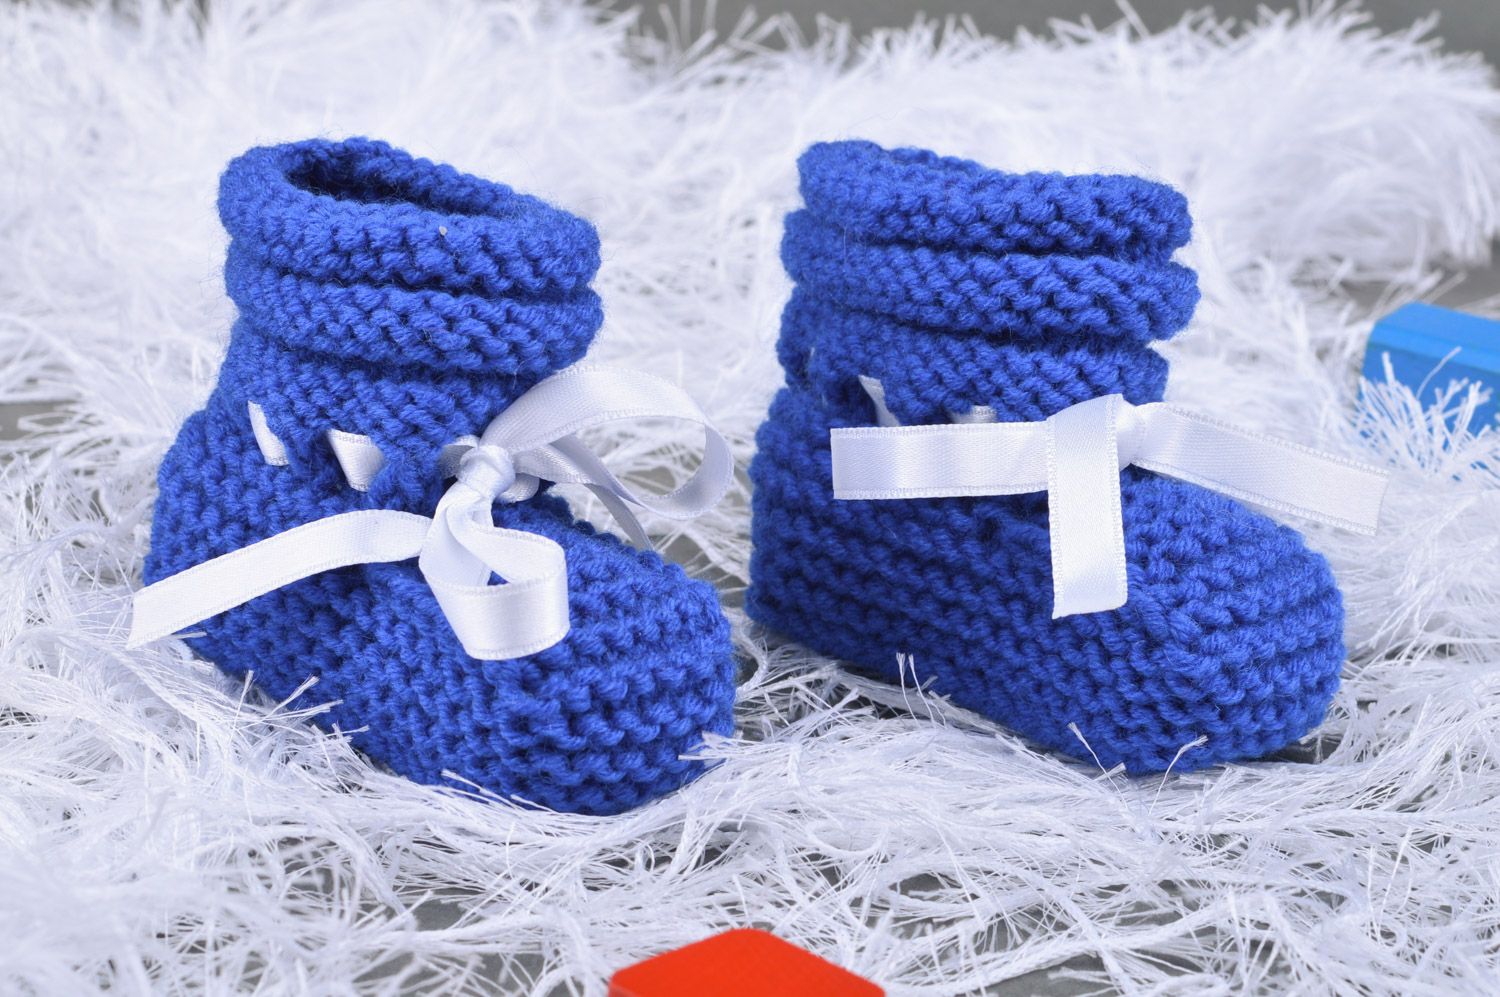 Handmade baby booties knitted of bright blue semi-woolen threads with satin bow photo 1